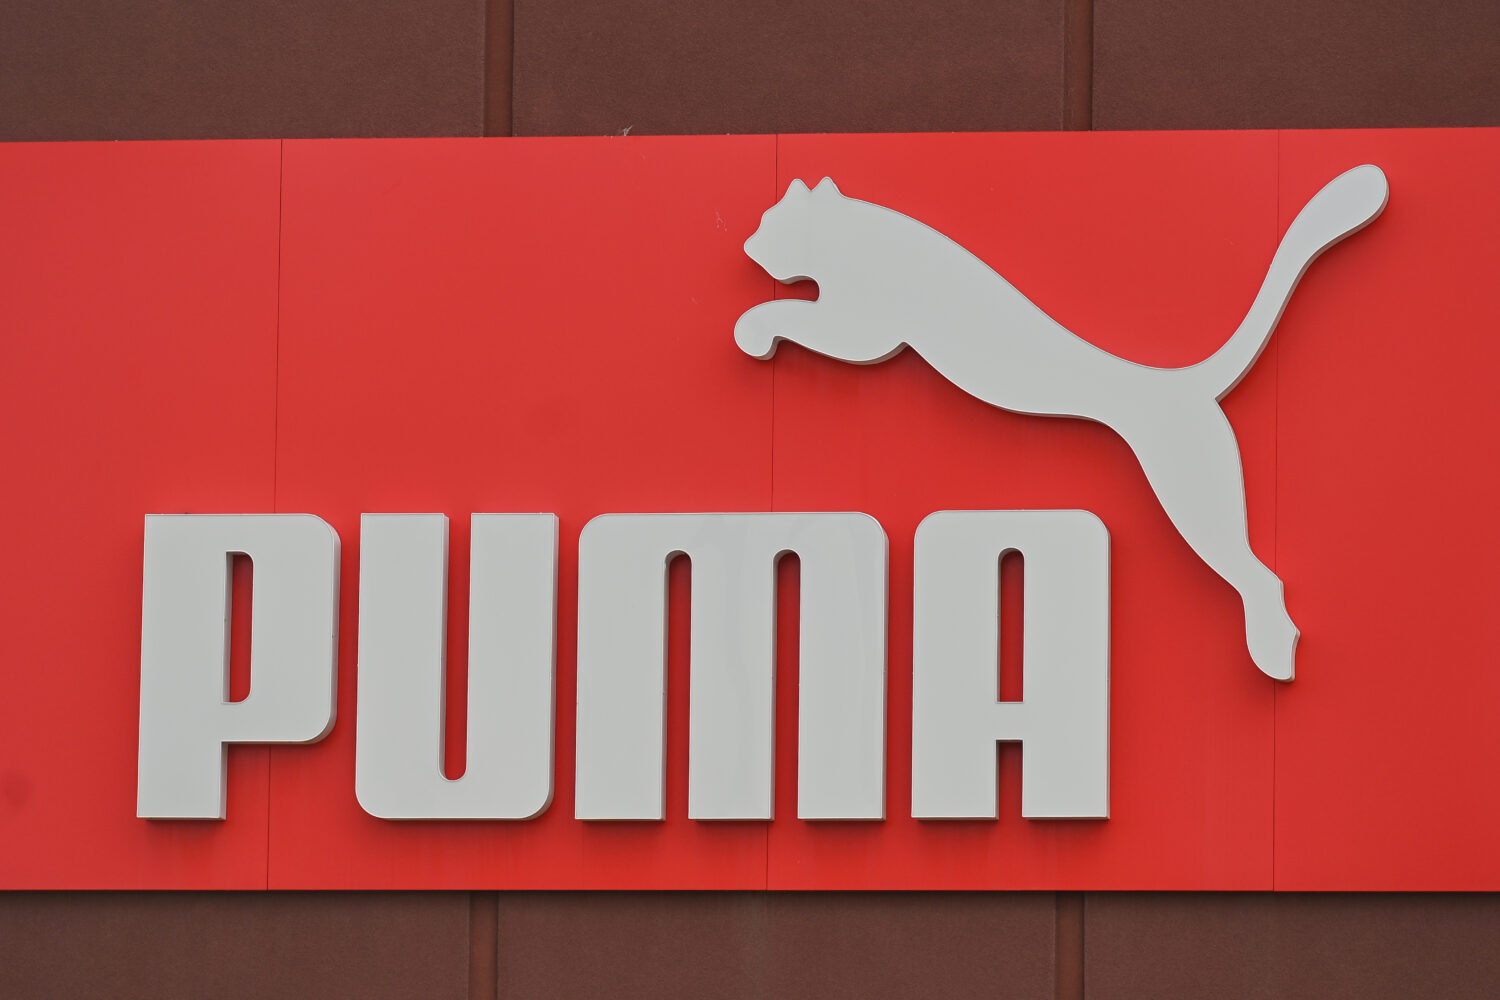 PUMA hosts the relaunch of the CLYDE shoe - Patrick McMullan